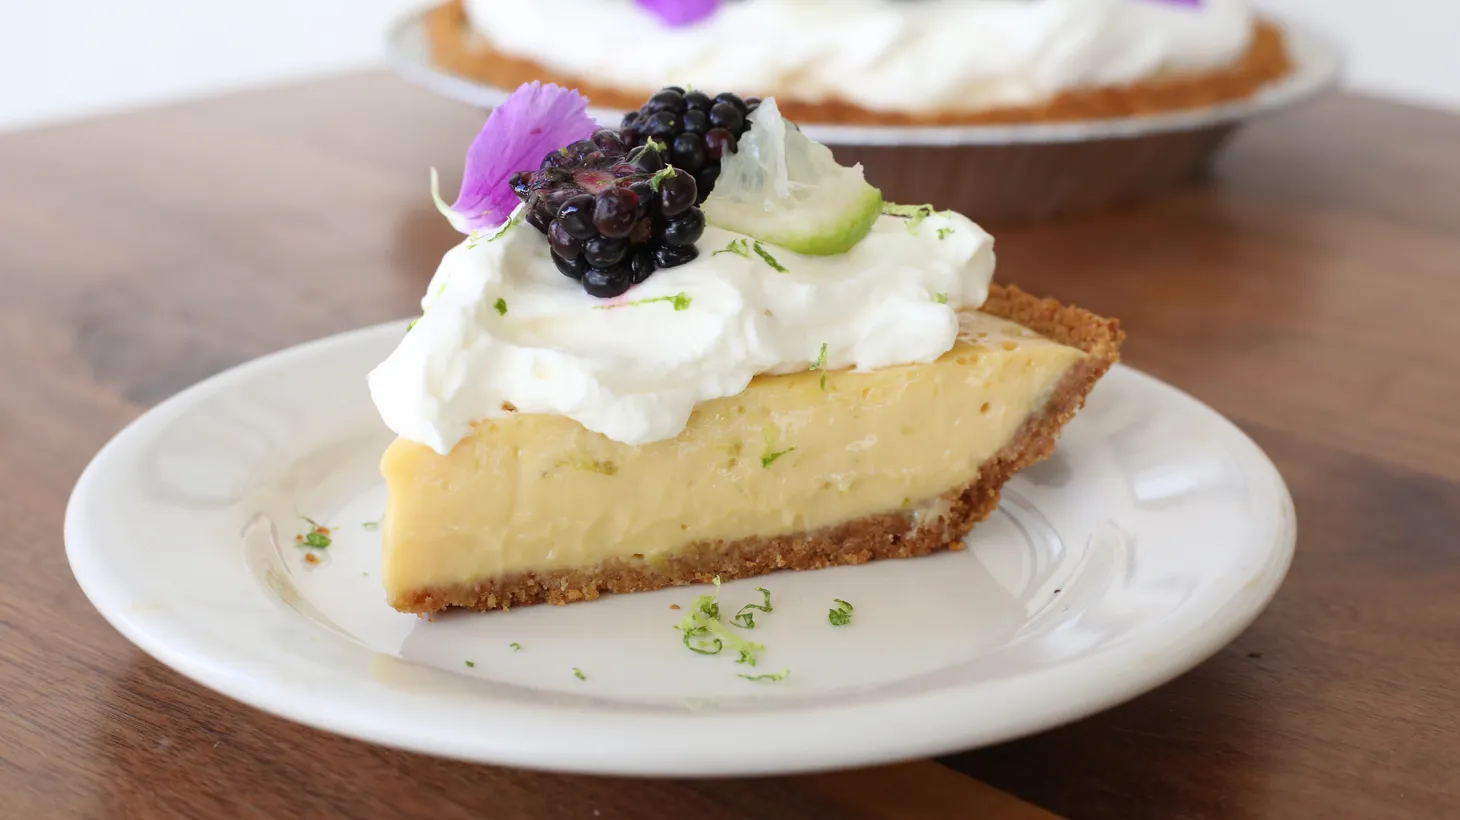 Valerie Confections makes this delectable key lime pie. Founder and chief baker Valerie Gordon will be one of the judges for KCRW's 2023 Pie Contest, on April 30 at UCLA.